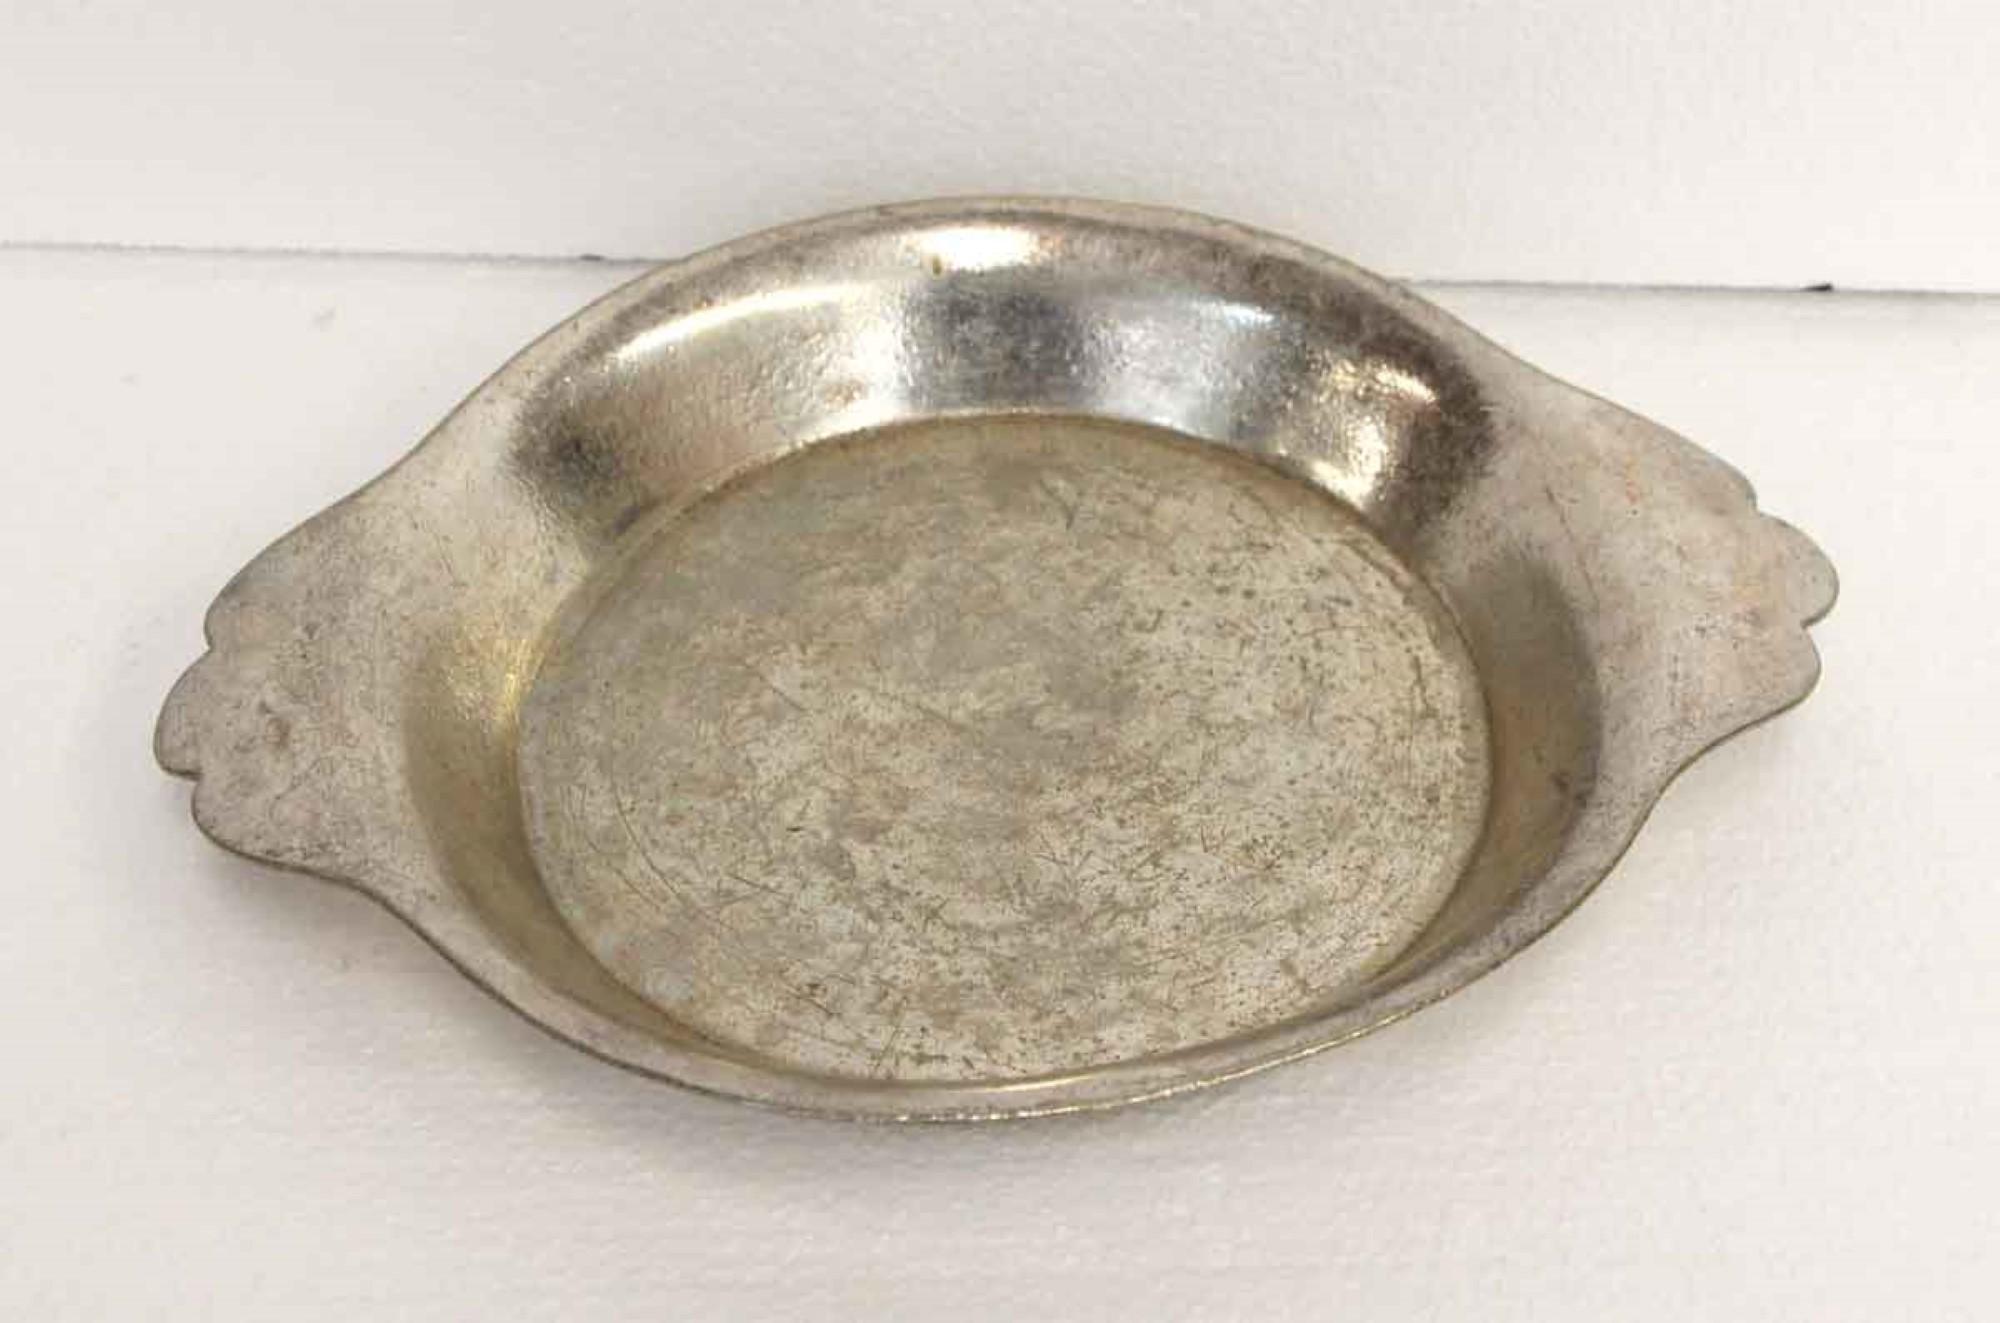 This shallow serving bowl is from the famed NYC Waldorf Astoria Hotel. It is silver plated brass and has scalloped handles for easy serving. It shows typical signs of wear and scratches for it's age. Included with your purchase is a Waldorf Astoria